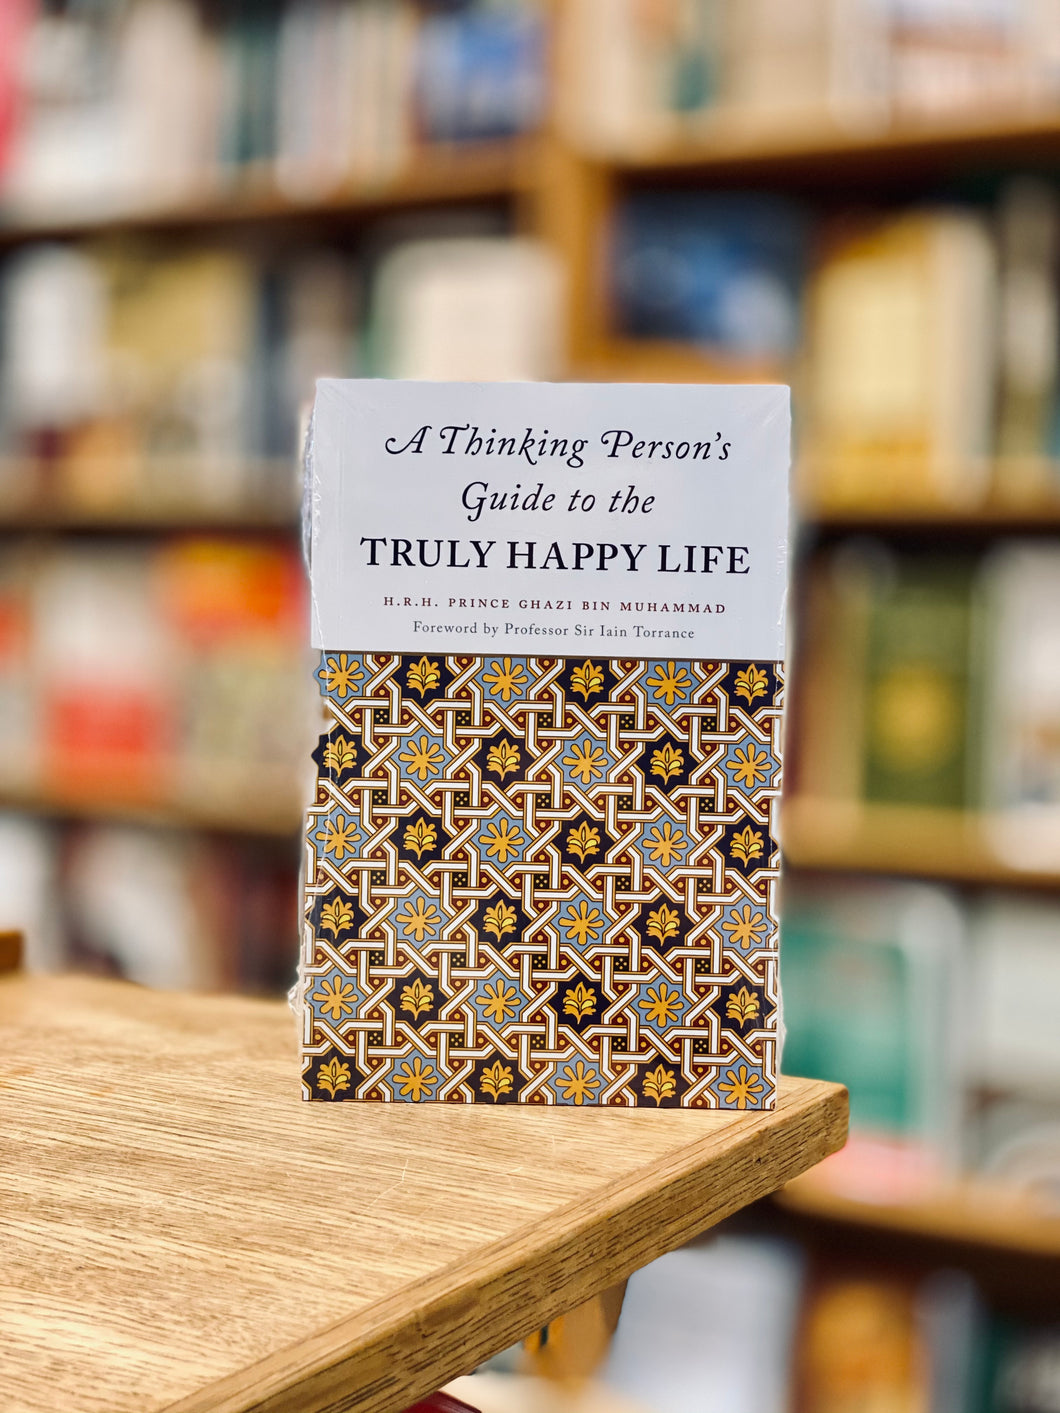 A THINKING PERSONS GUIDE TO THE TRULY HAPPY LIFE